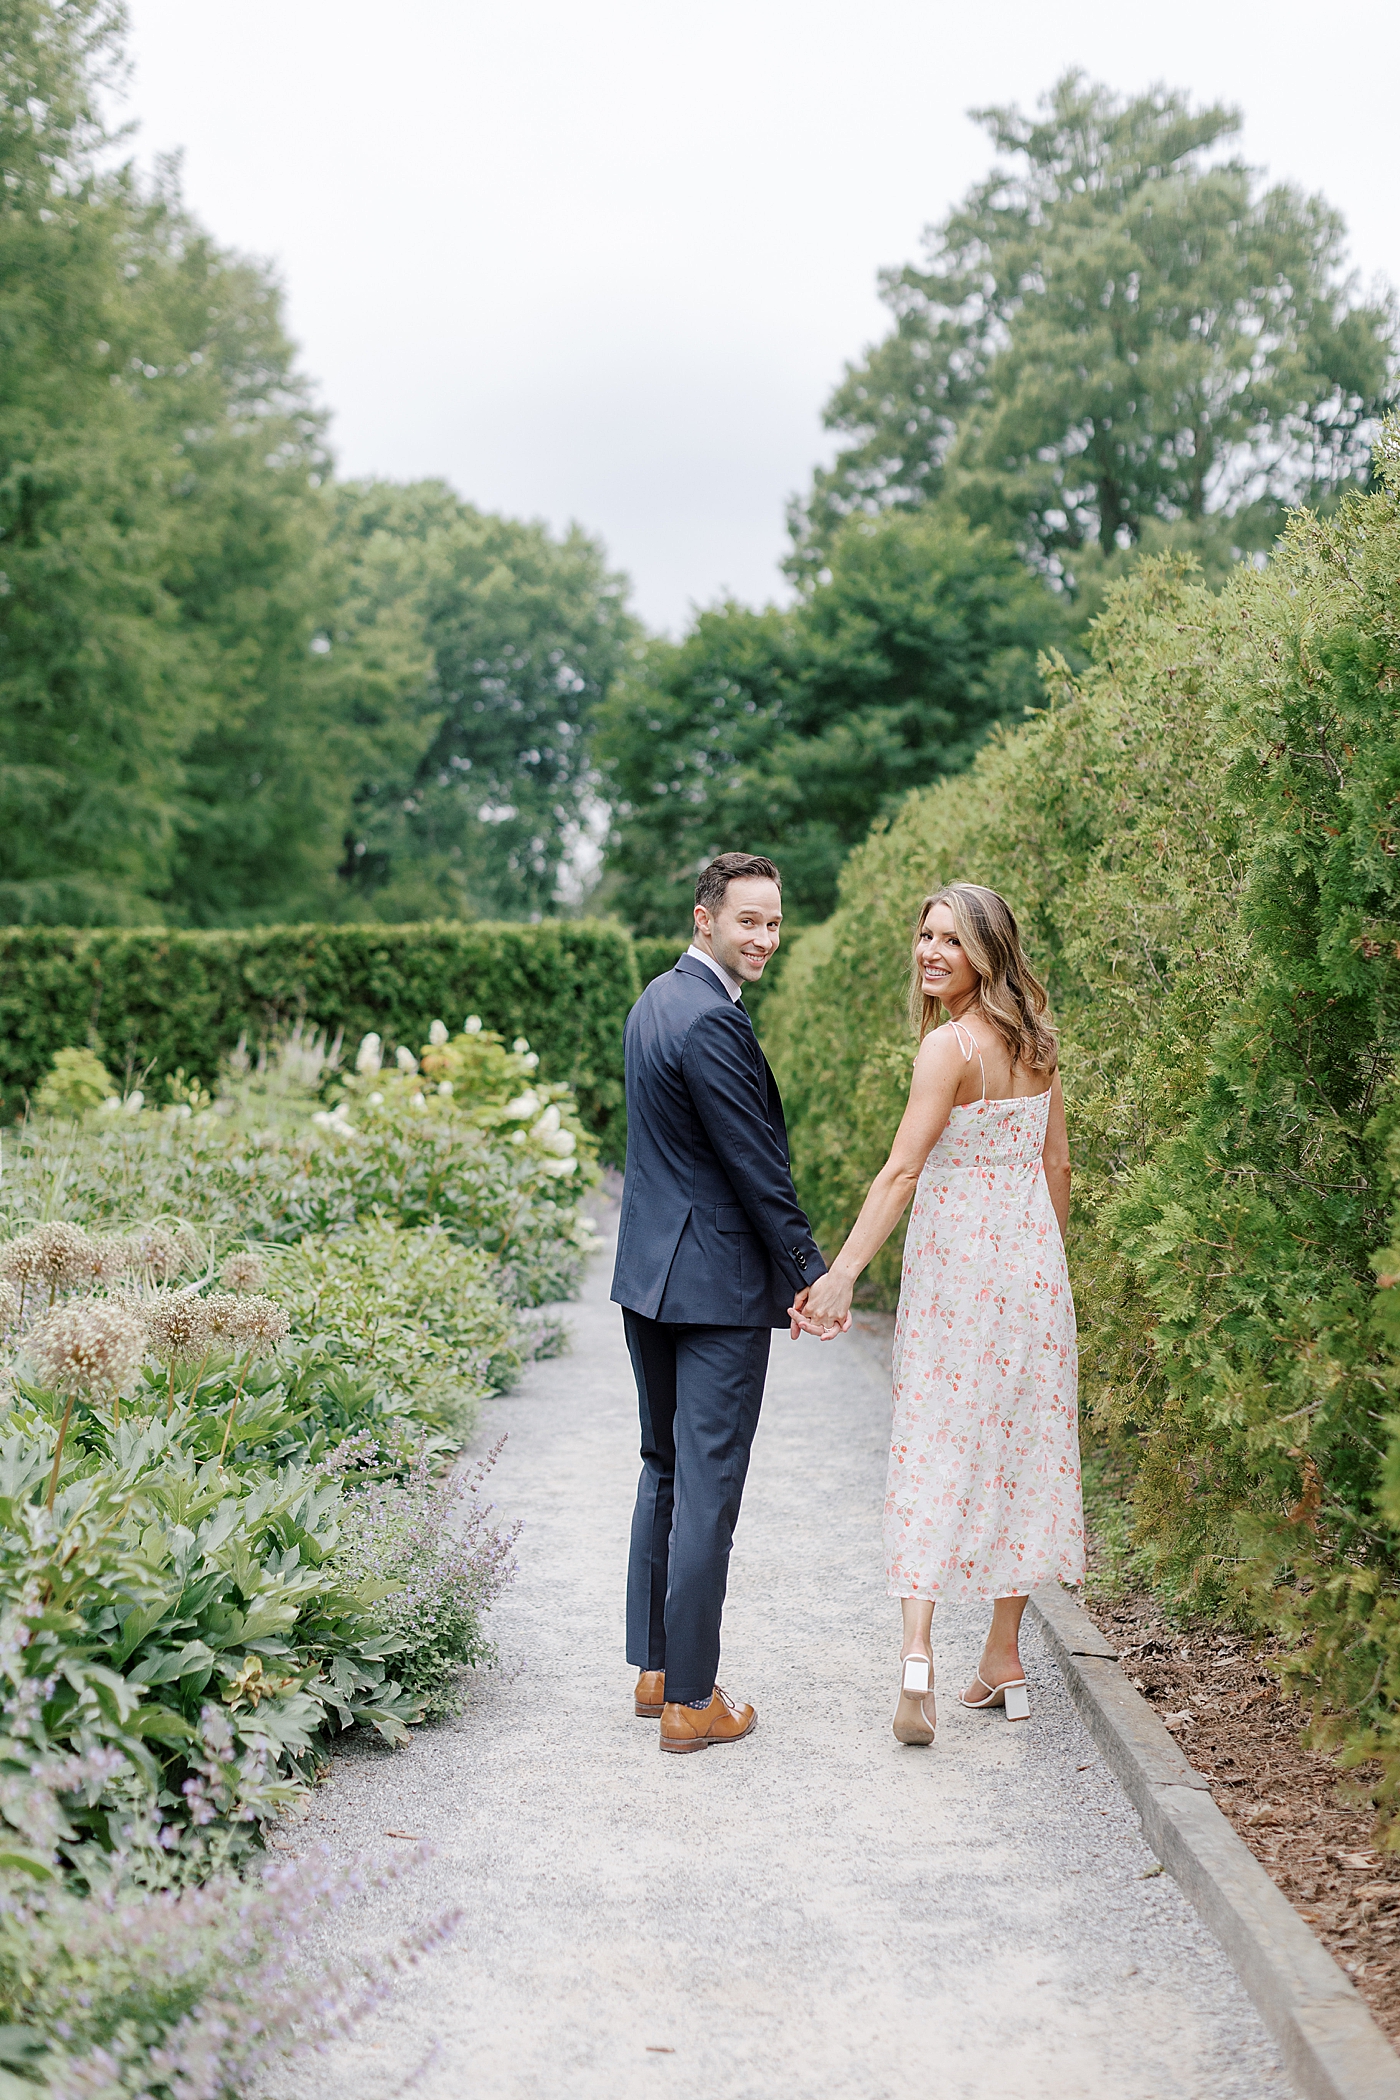 Couple holding hands walking through Longwood Garden | Photo by Hope Helmuth Photography